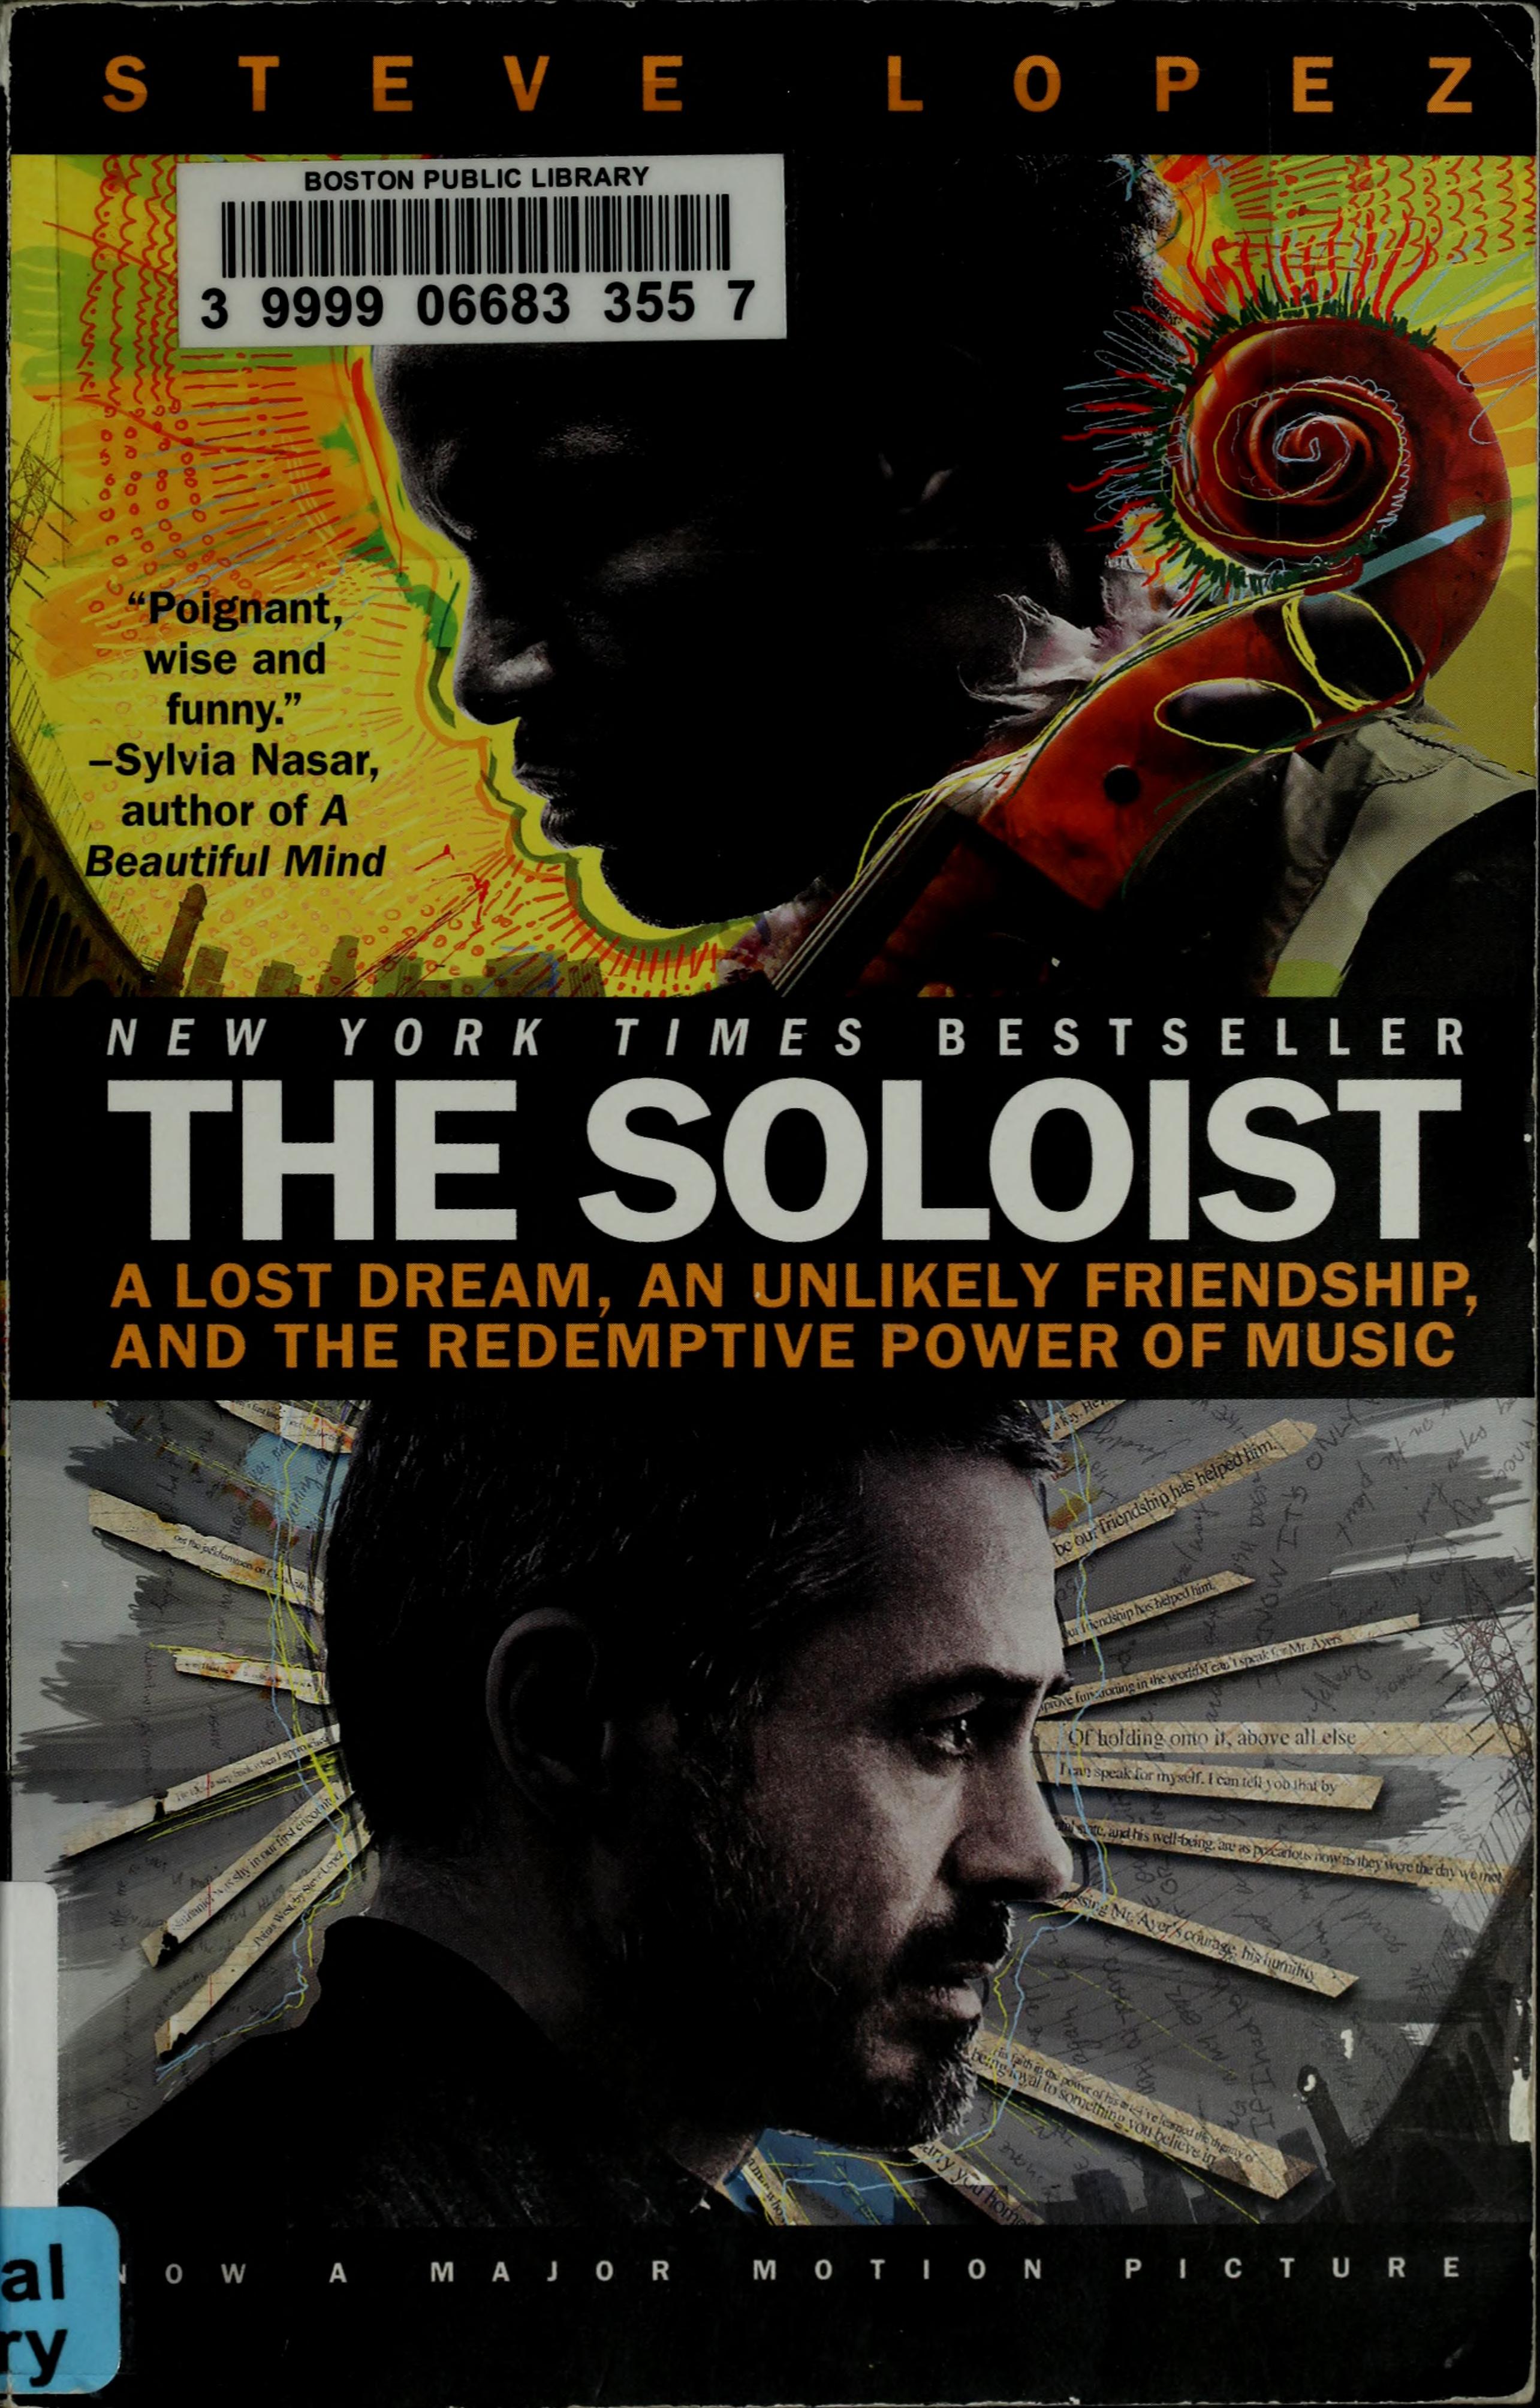 THE SOLOIST – Reading Group Choices